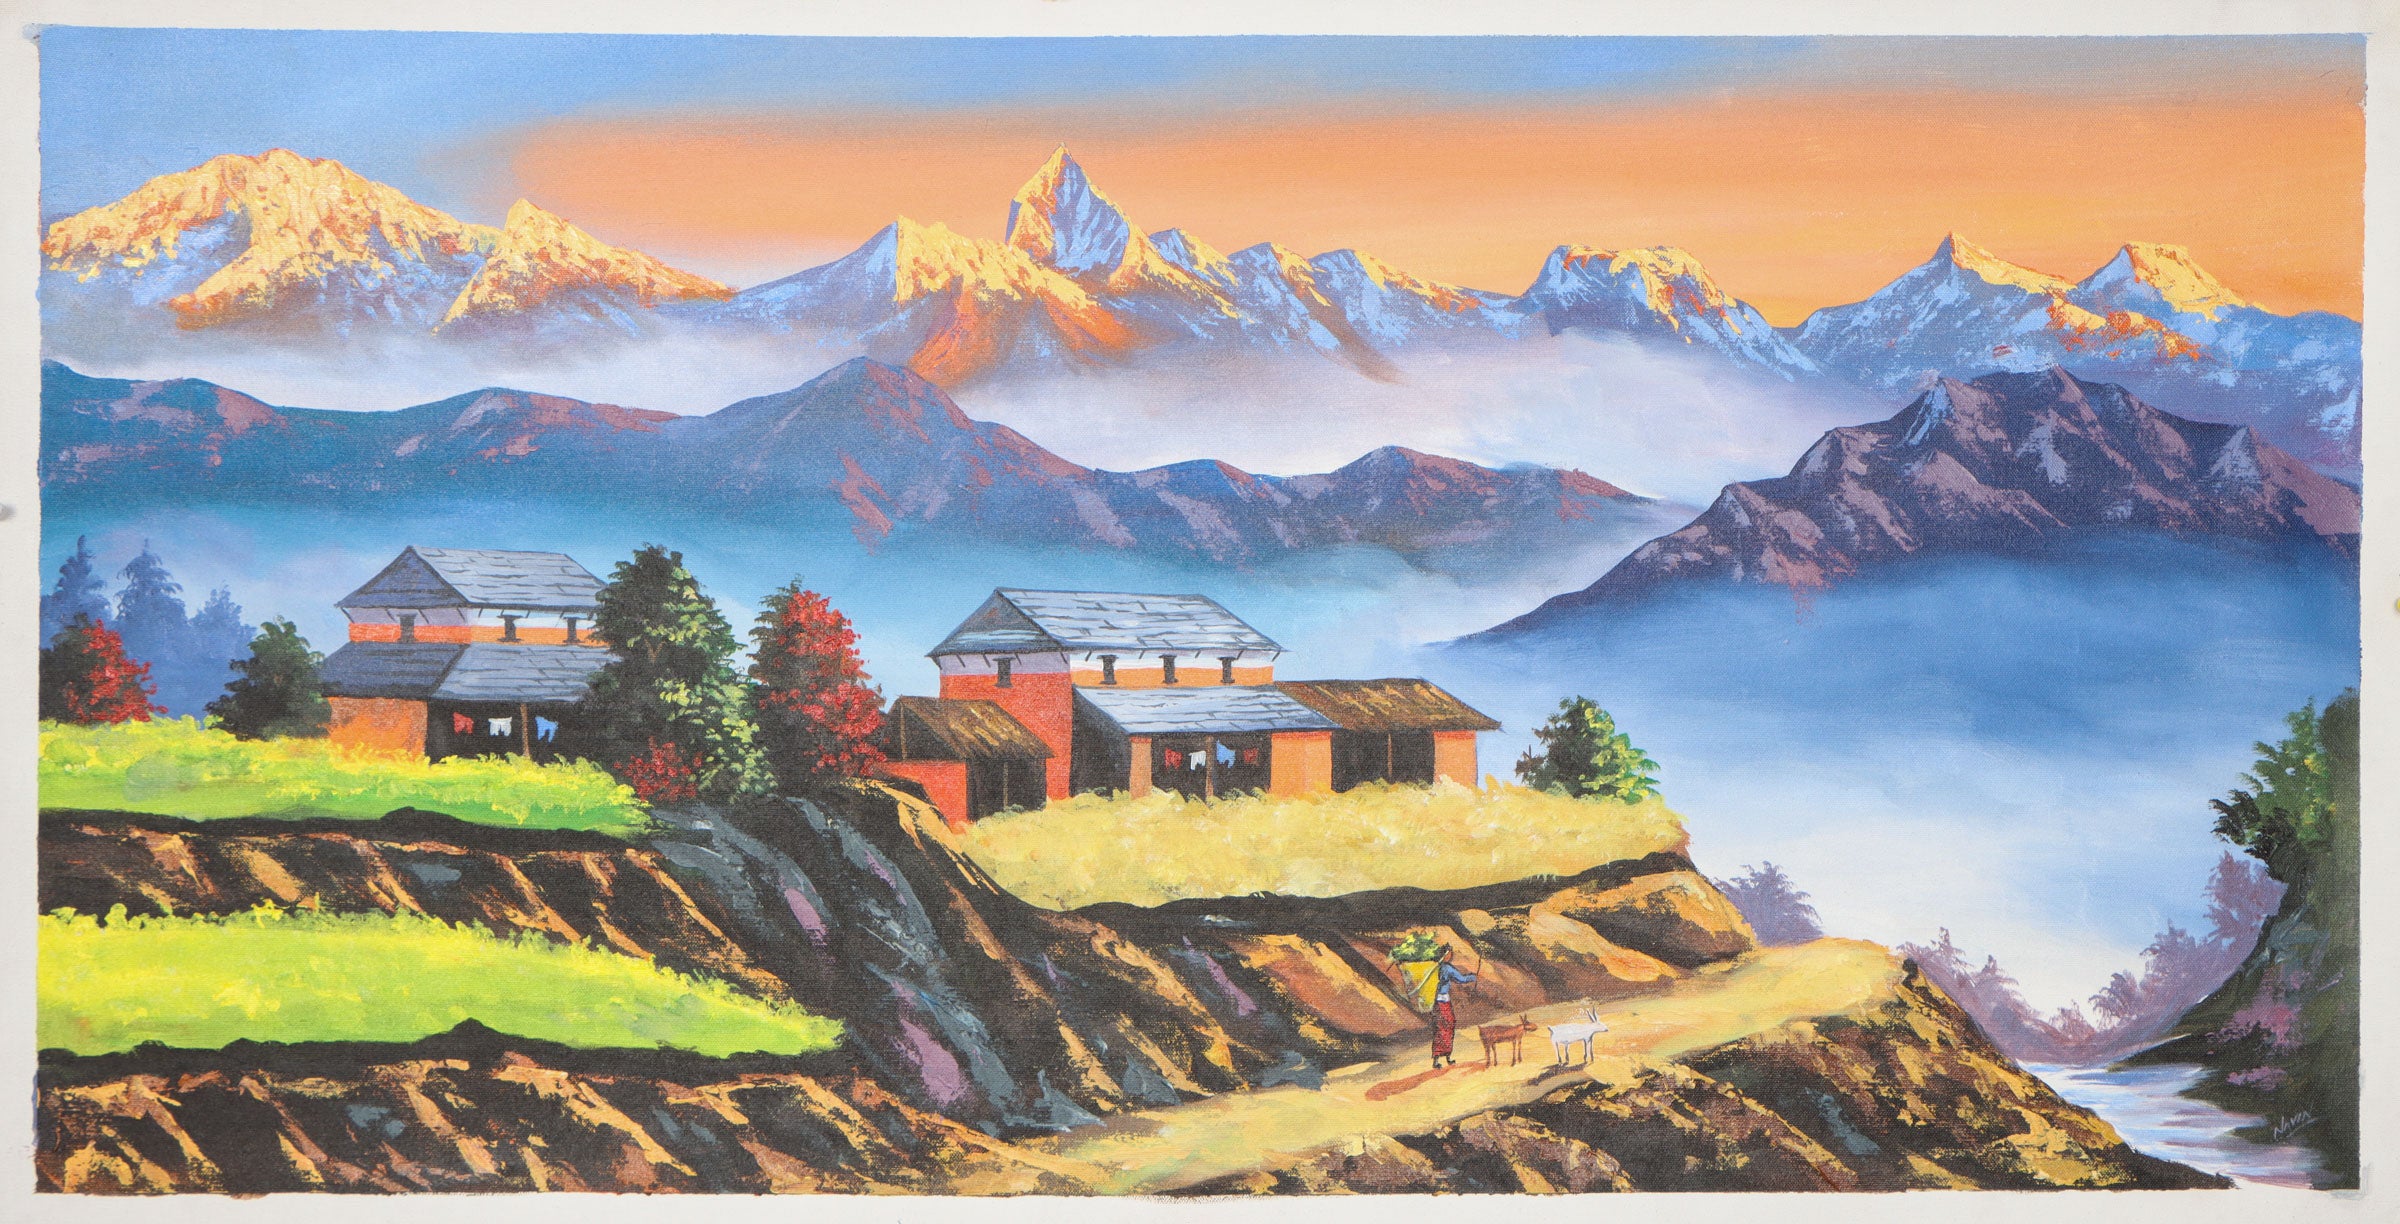 Oil Painting of Mount Everest for aesthetic wall decor.